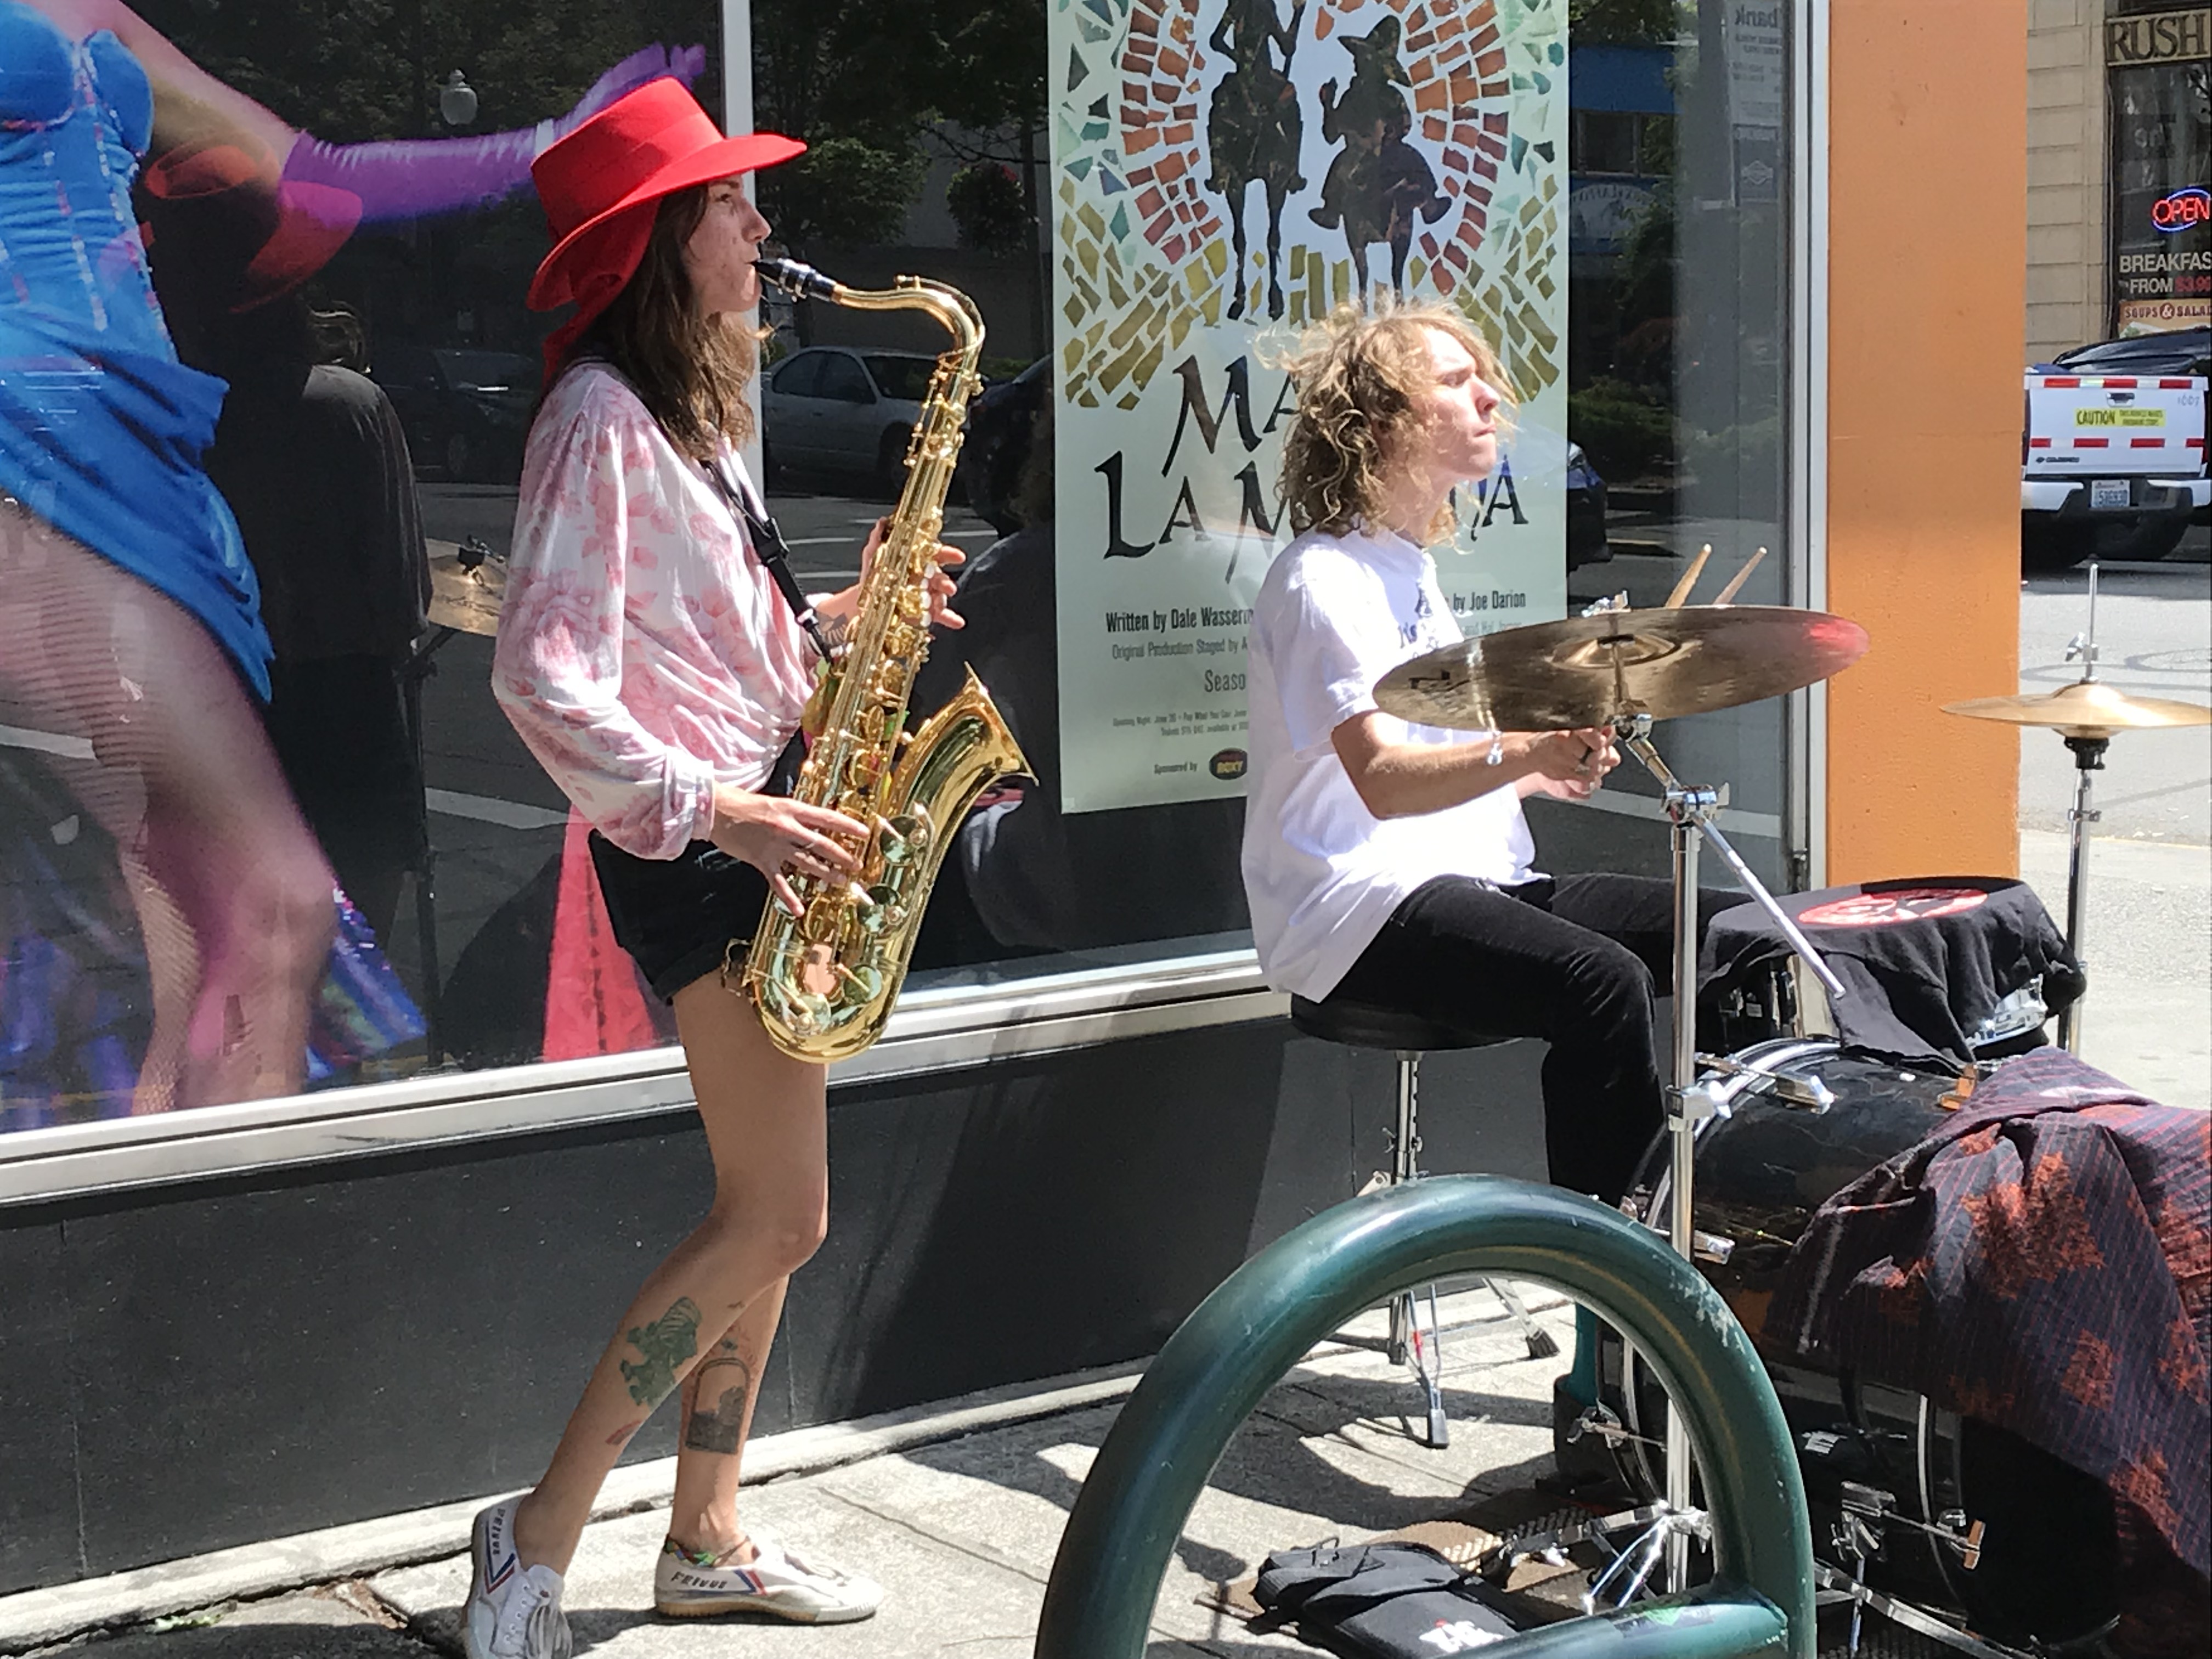 street musicians play in downtown Olympia.